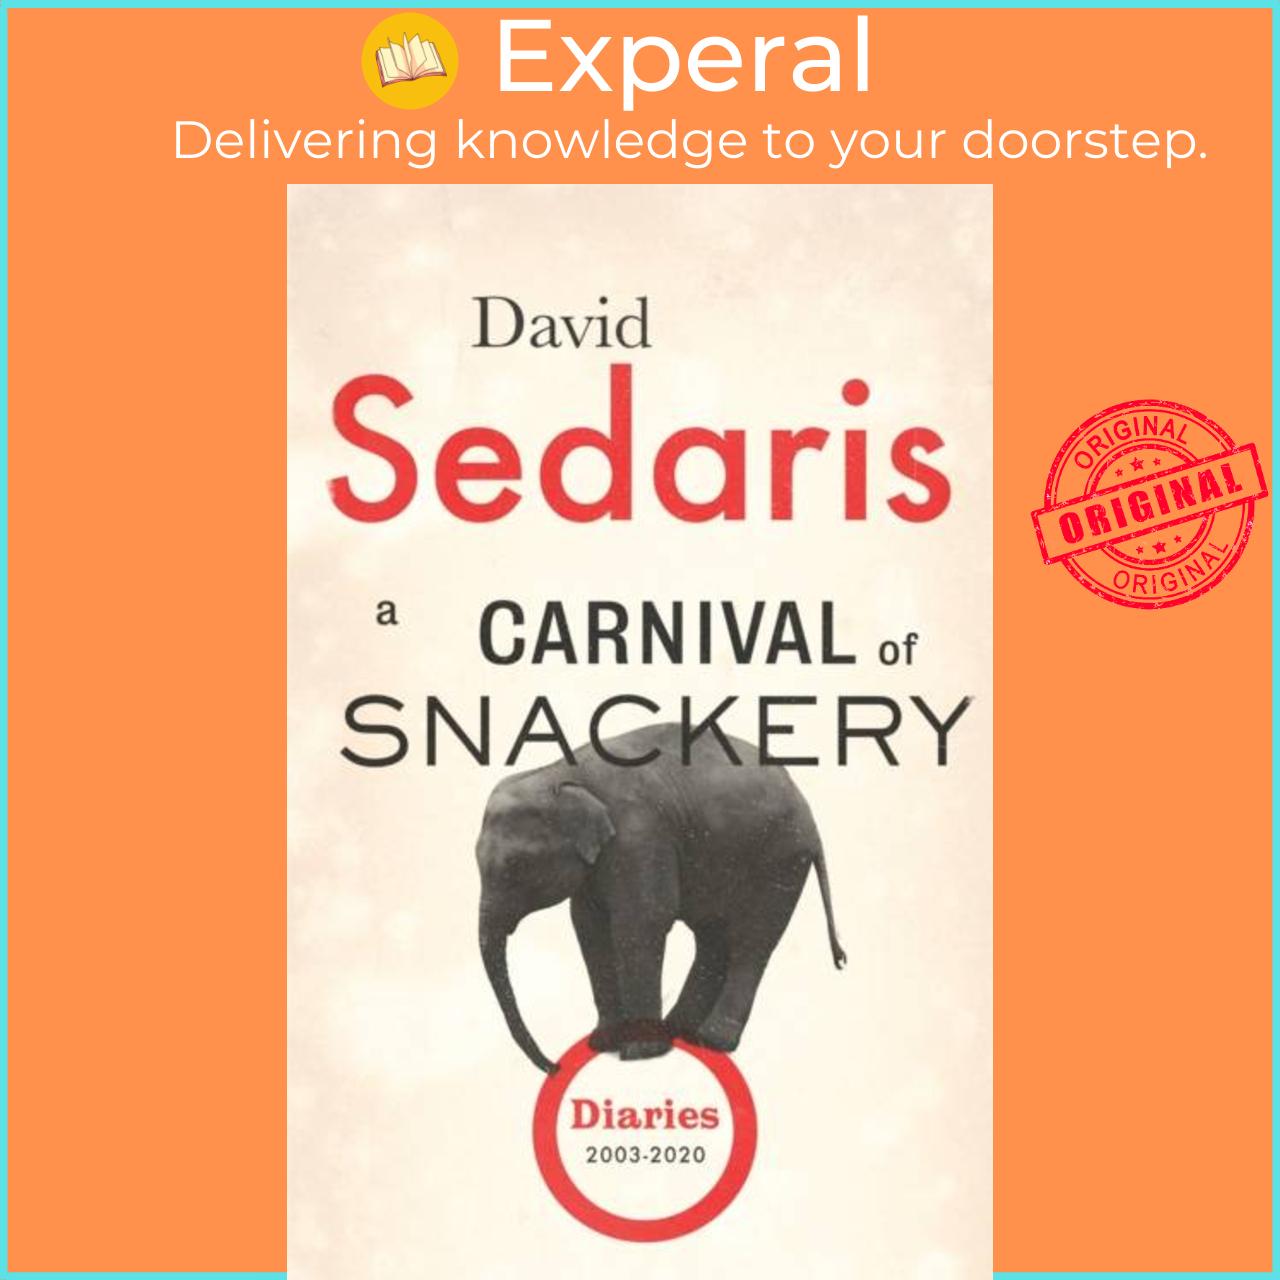 Sách - A Carnival of Snackery - Diaries: Volume Two by David Sedaris (UK edition, hardcover)